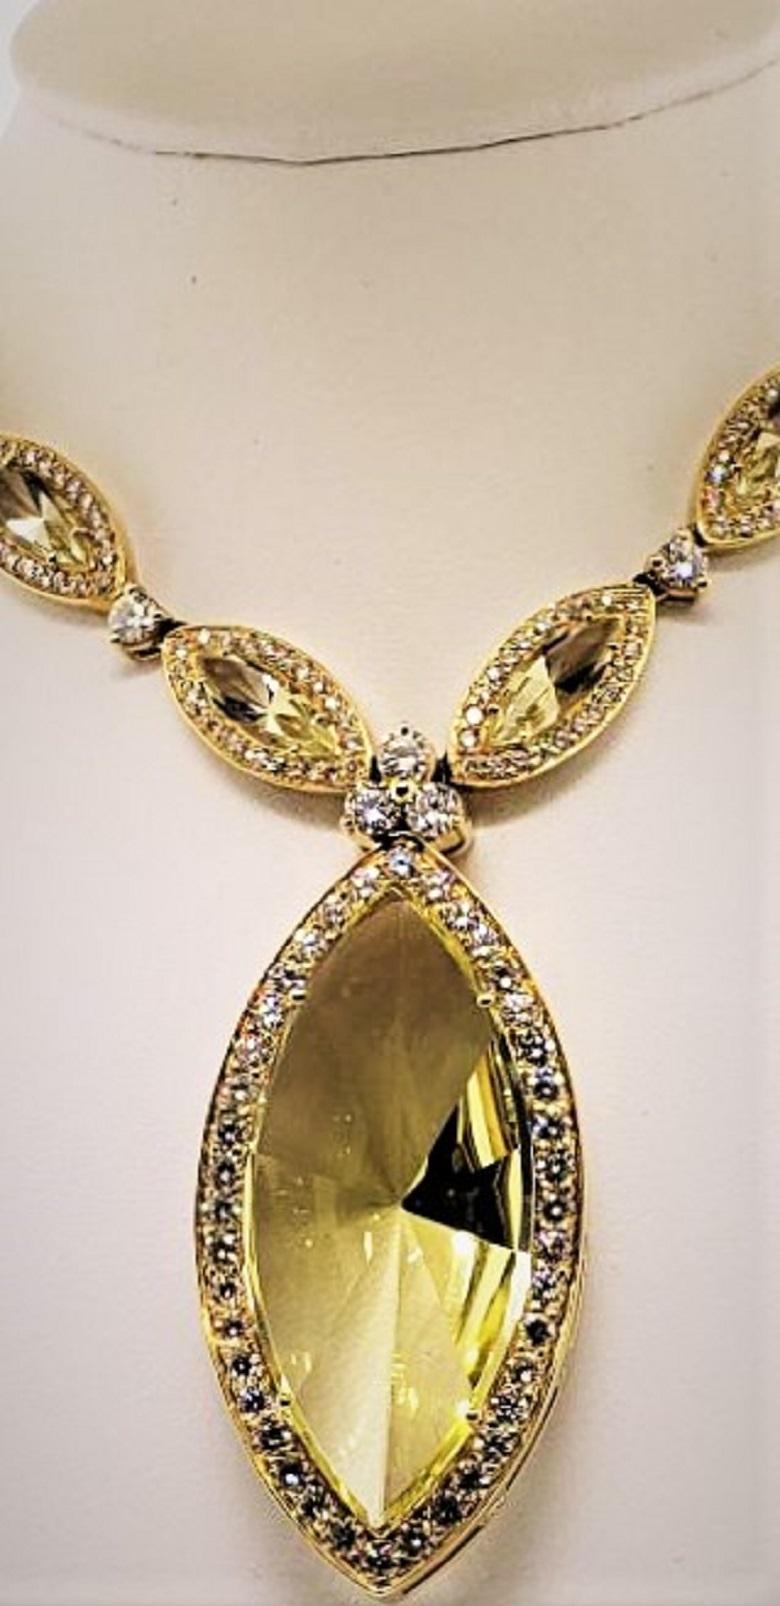 Designed, Created, and conceived by Michael Engelhardt, this beautifully crafted necklace will bring much life and happiness to the person wearing it.  The pendant is highlighted by a beautifully cut Marquis (31.79 carats) yellow quartz drop.  The